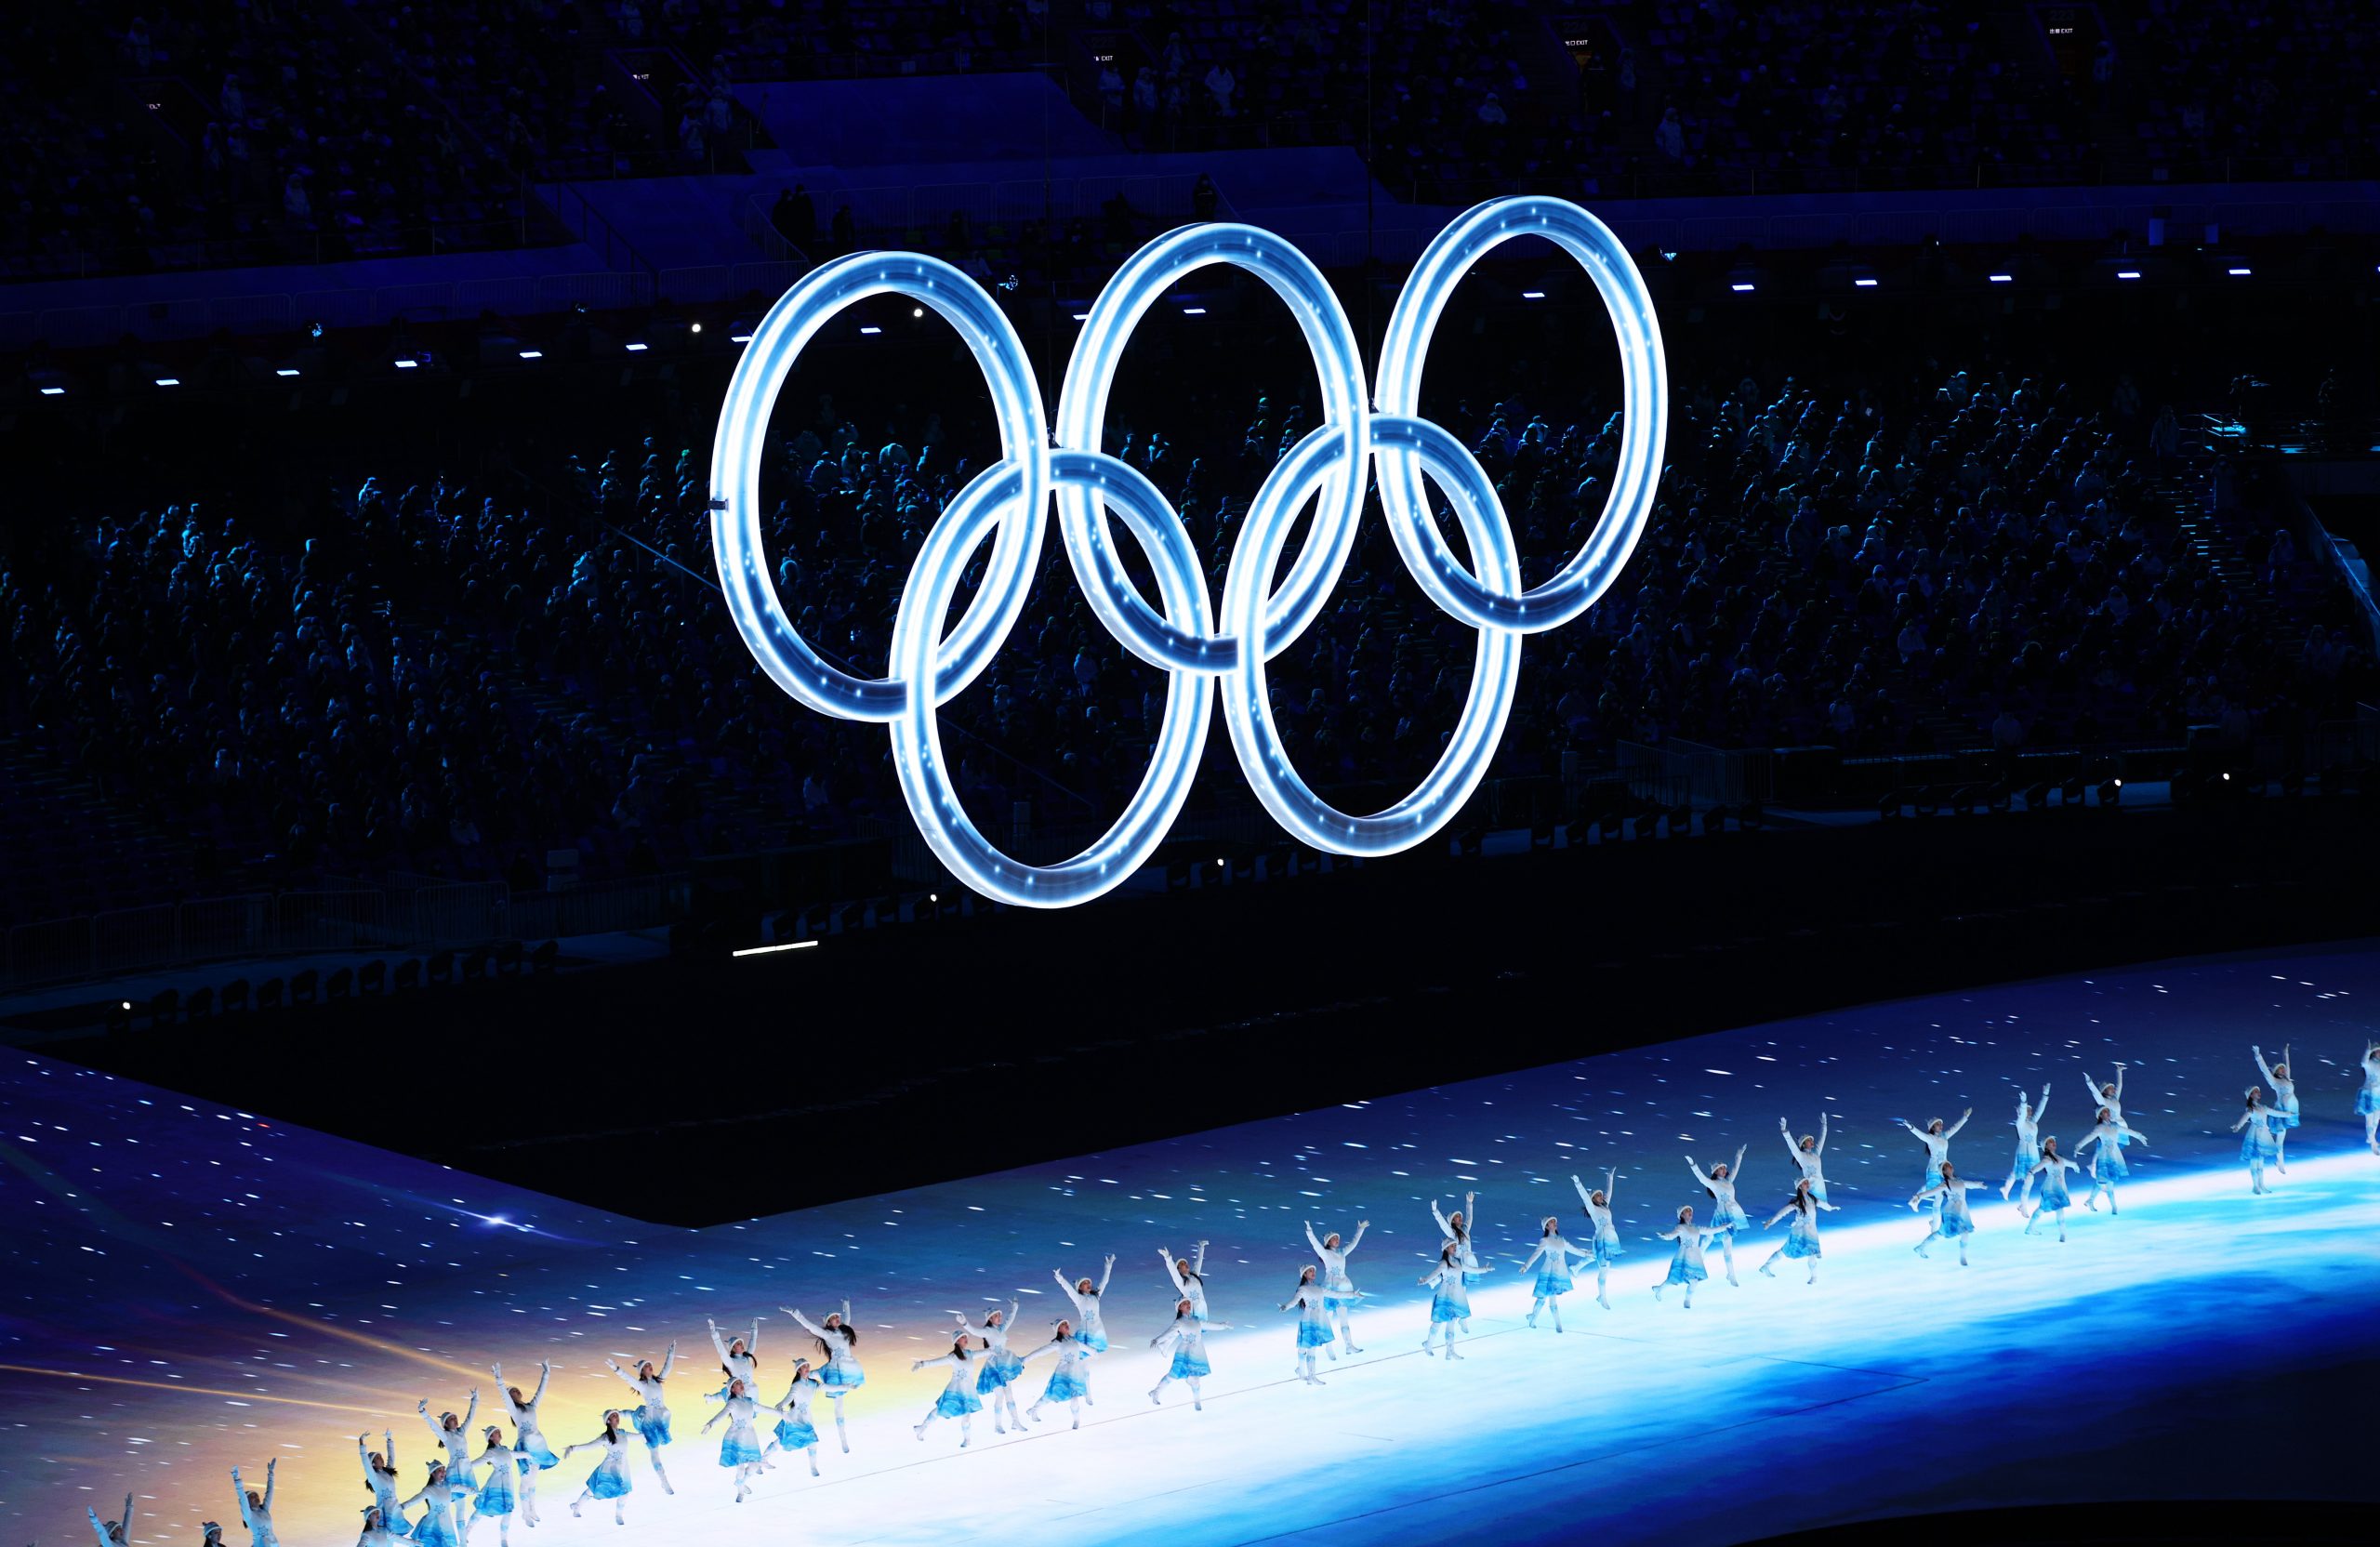 The opening ceremony at the 2022 Winter Olympics